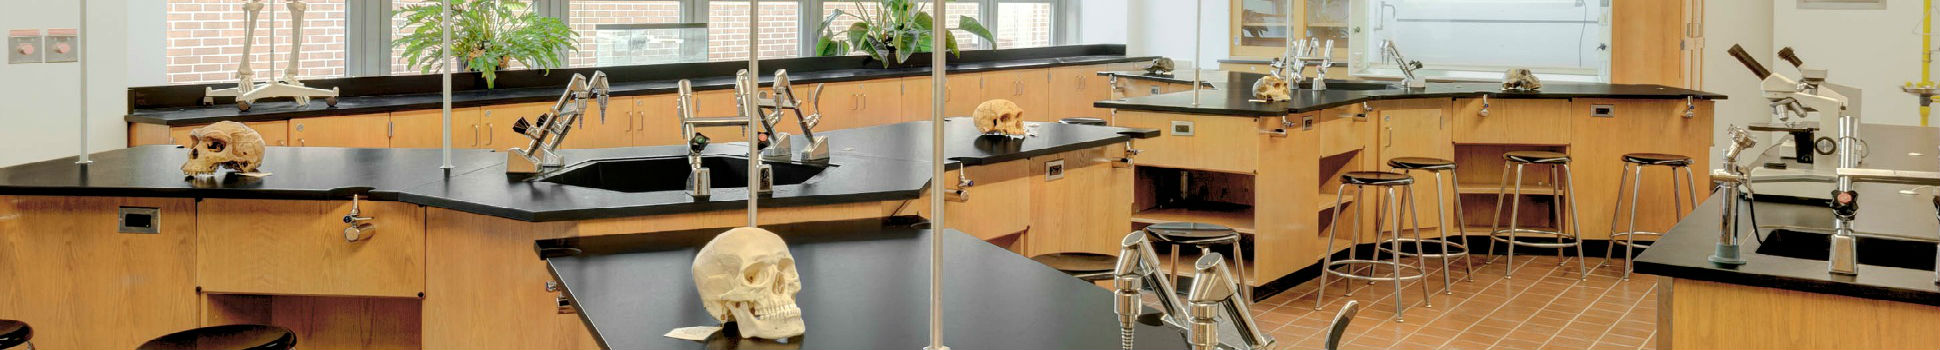 Middle College Campus Science Room - Queens